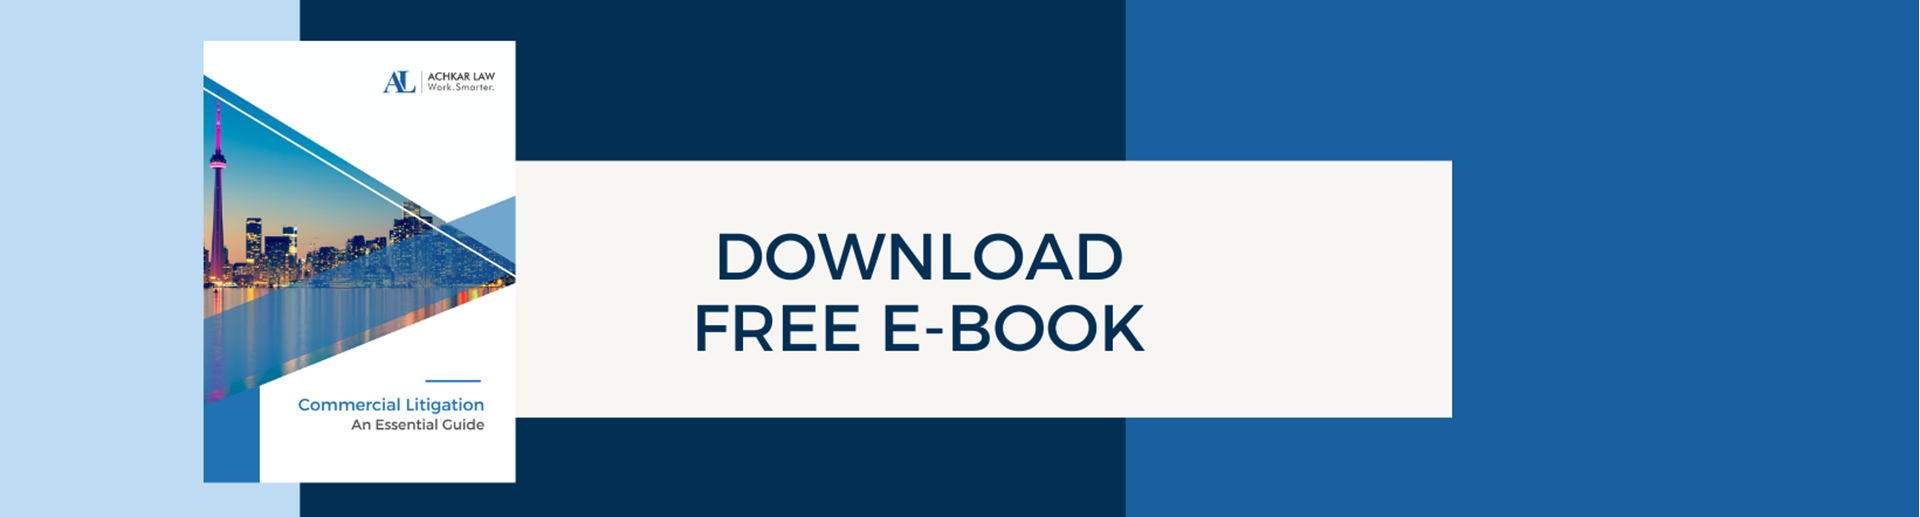 download free ebook now